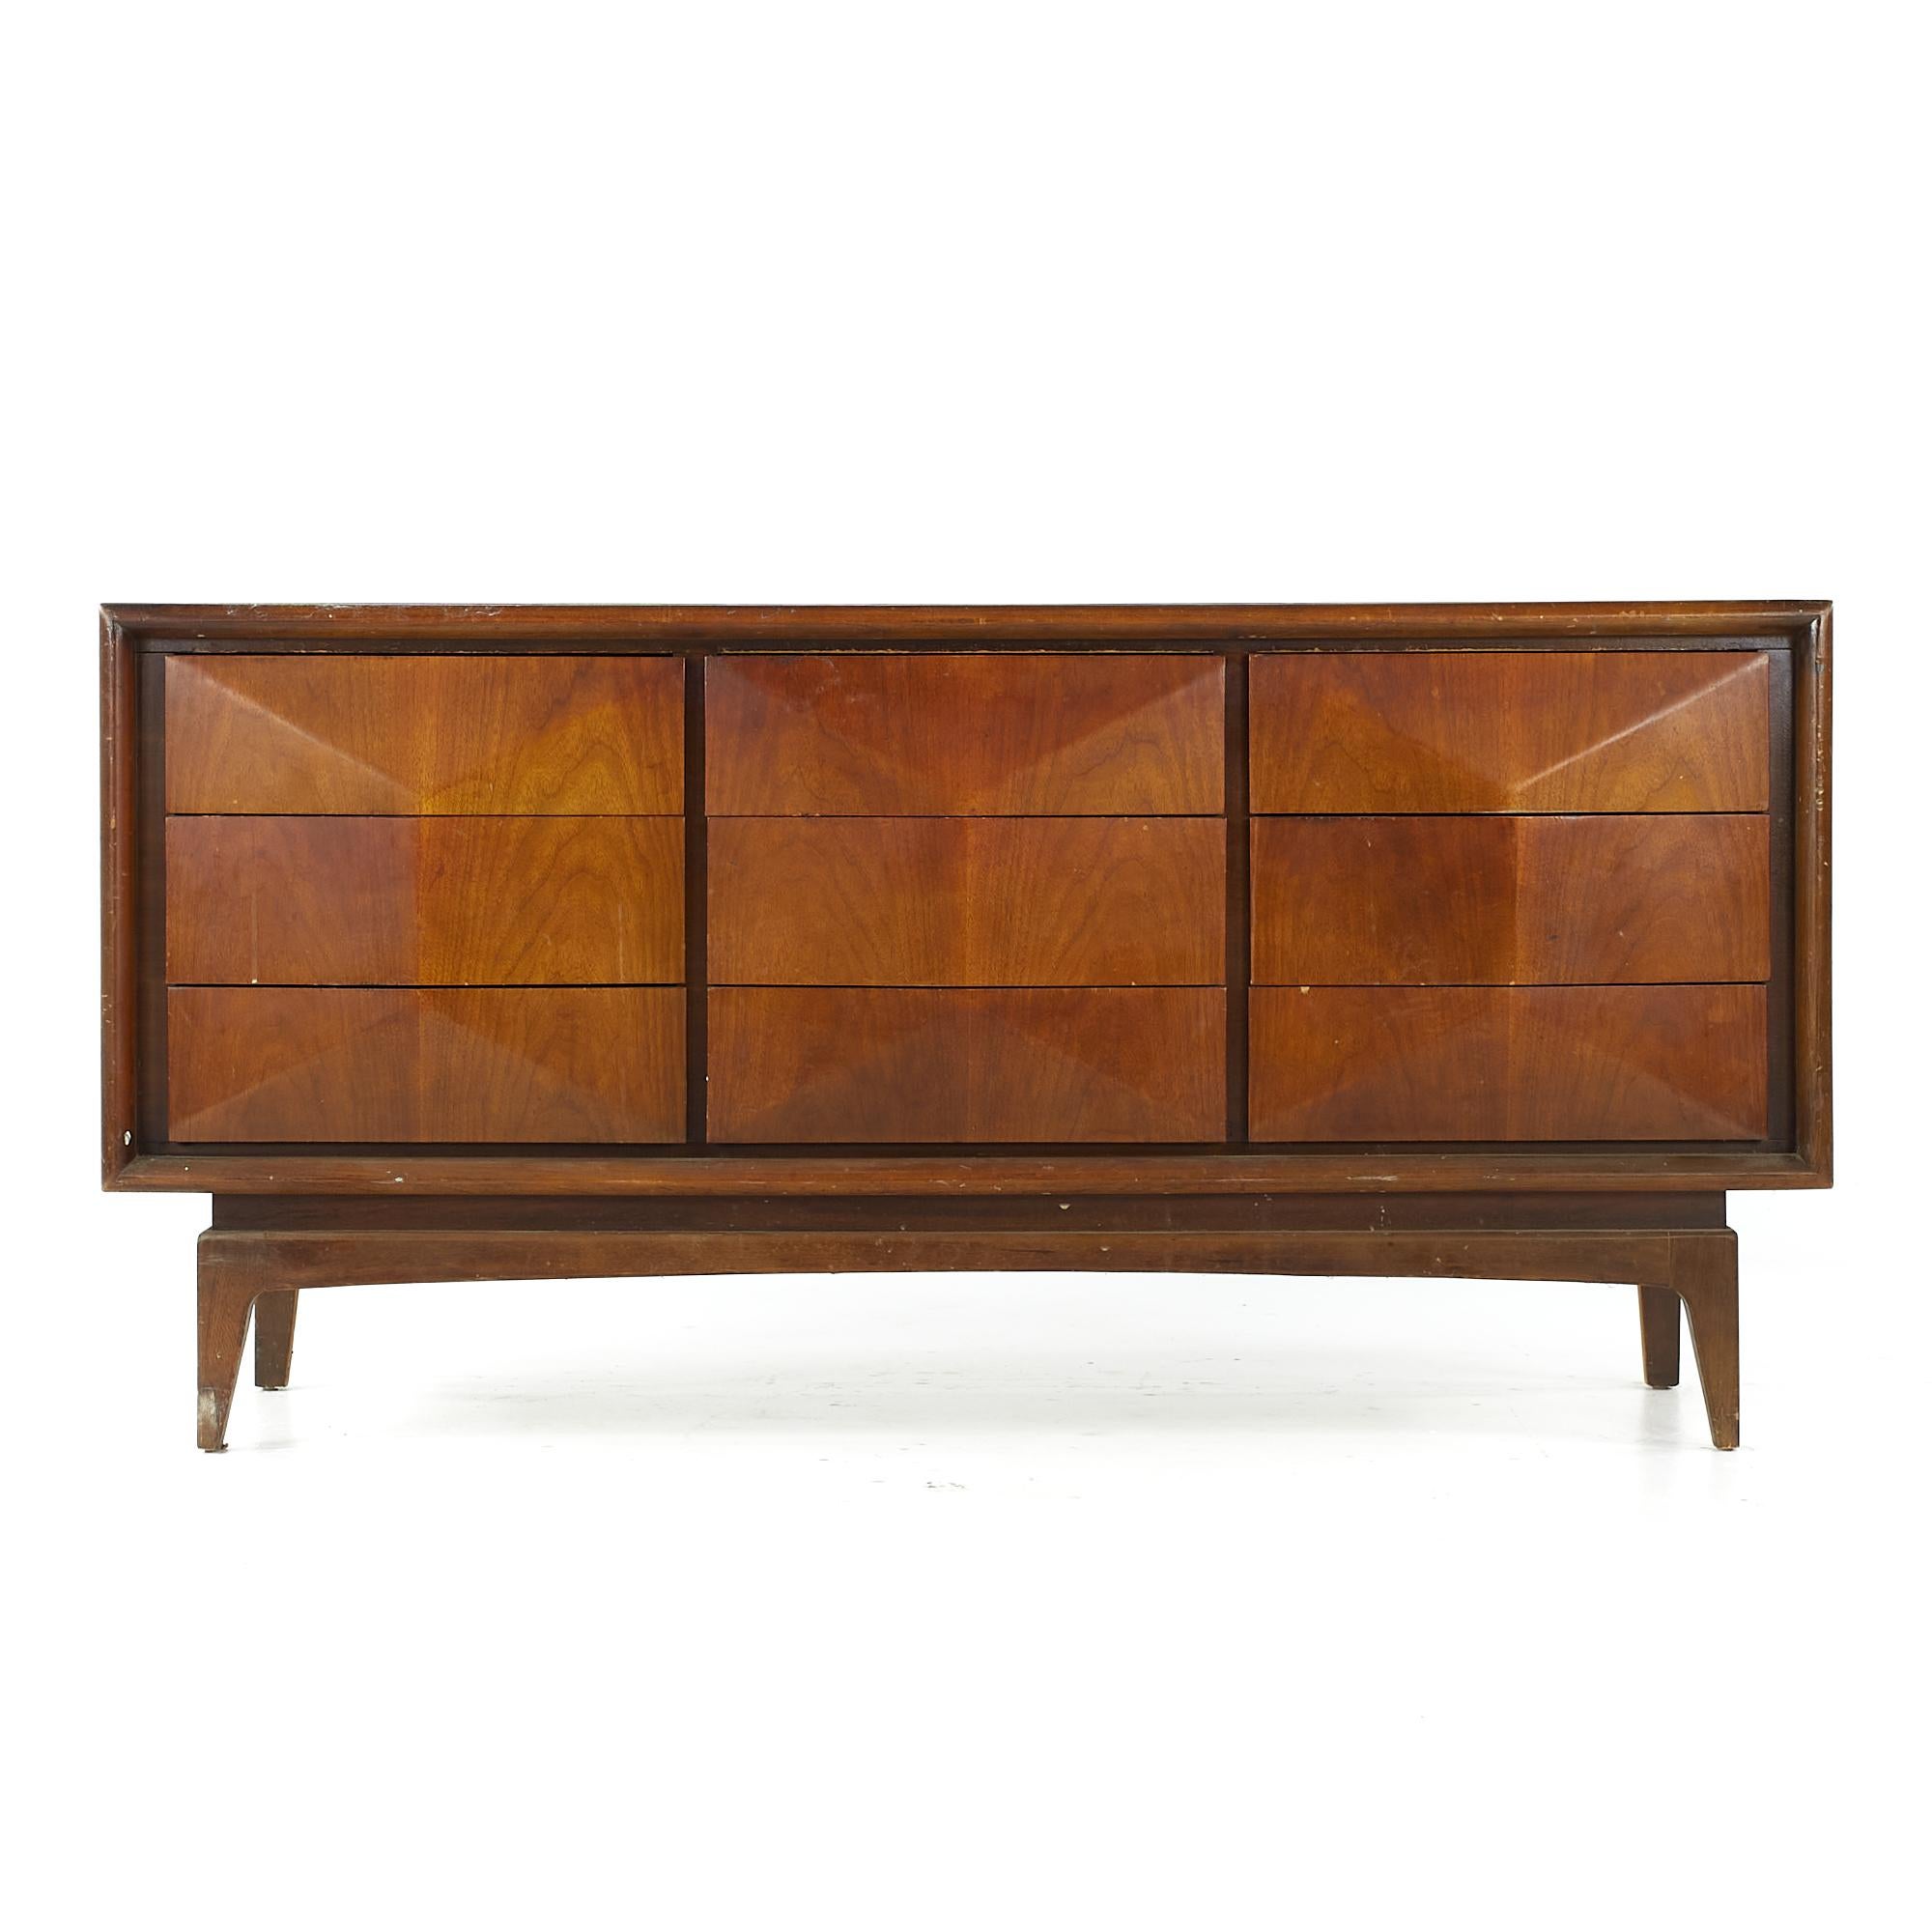 United midcentury diamond walnut lowboy 9 drawer dresser.

This lowboy measures: 62 wide x 19 deep x 30.75 inches high.

All pieces of furniture can be had in what we call restored vintage condition. That means the piece is restored upon